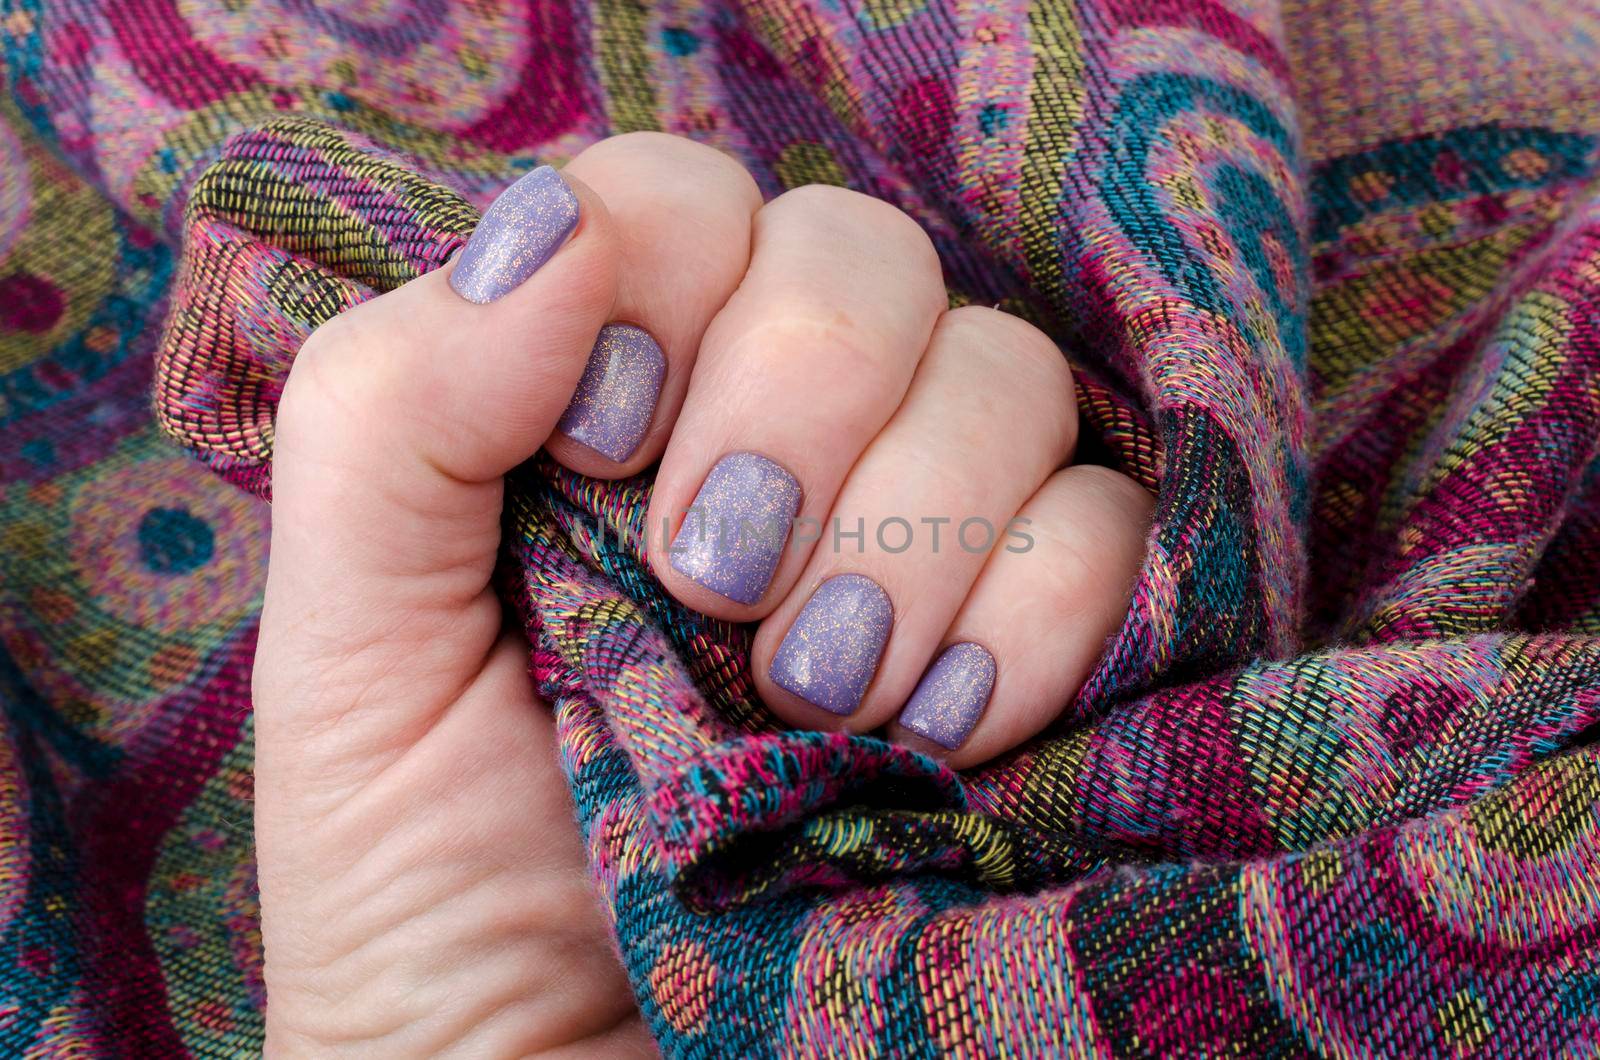 Hand of an adult woman with painted nails, manicure, nail polish. Studio Photo